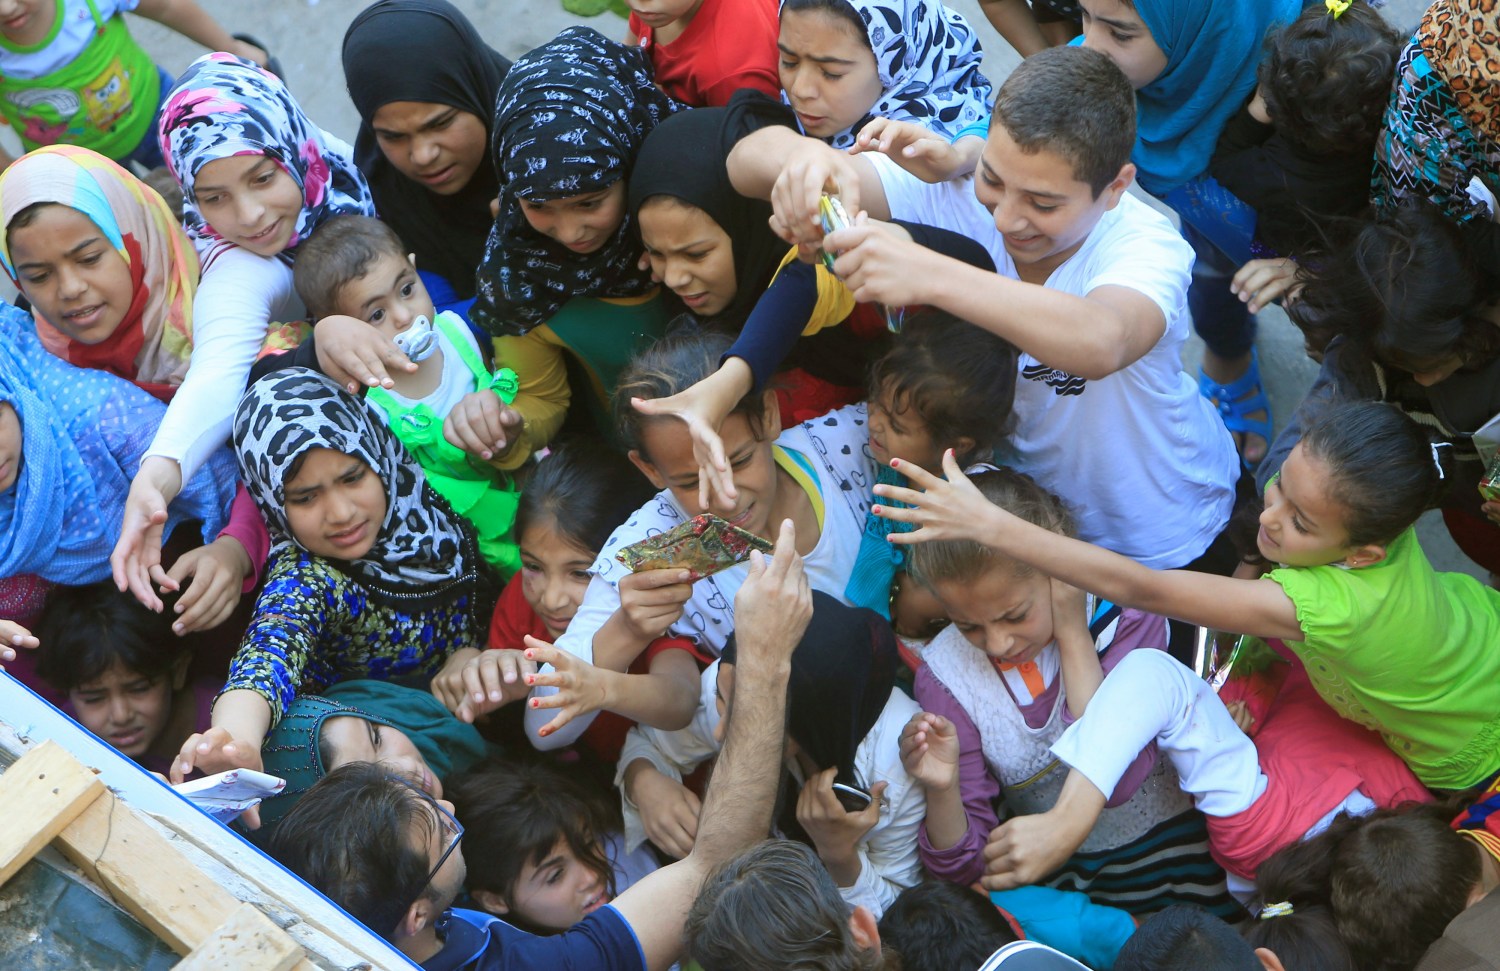 Syrian refugee children receive gifts in a housing compound in southern Lebanon.